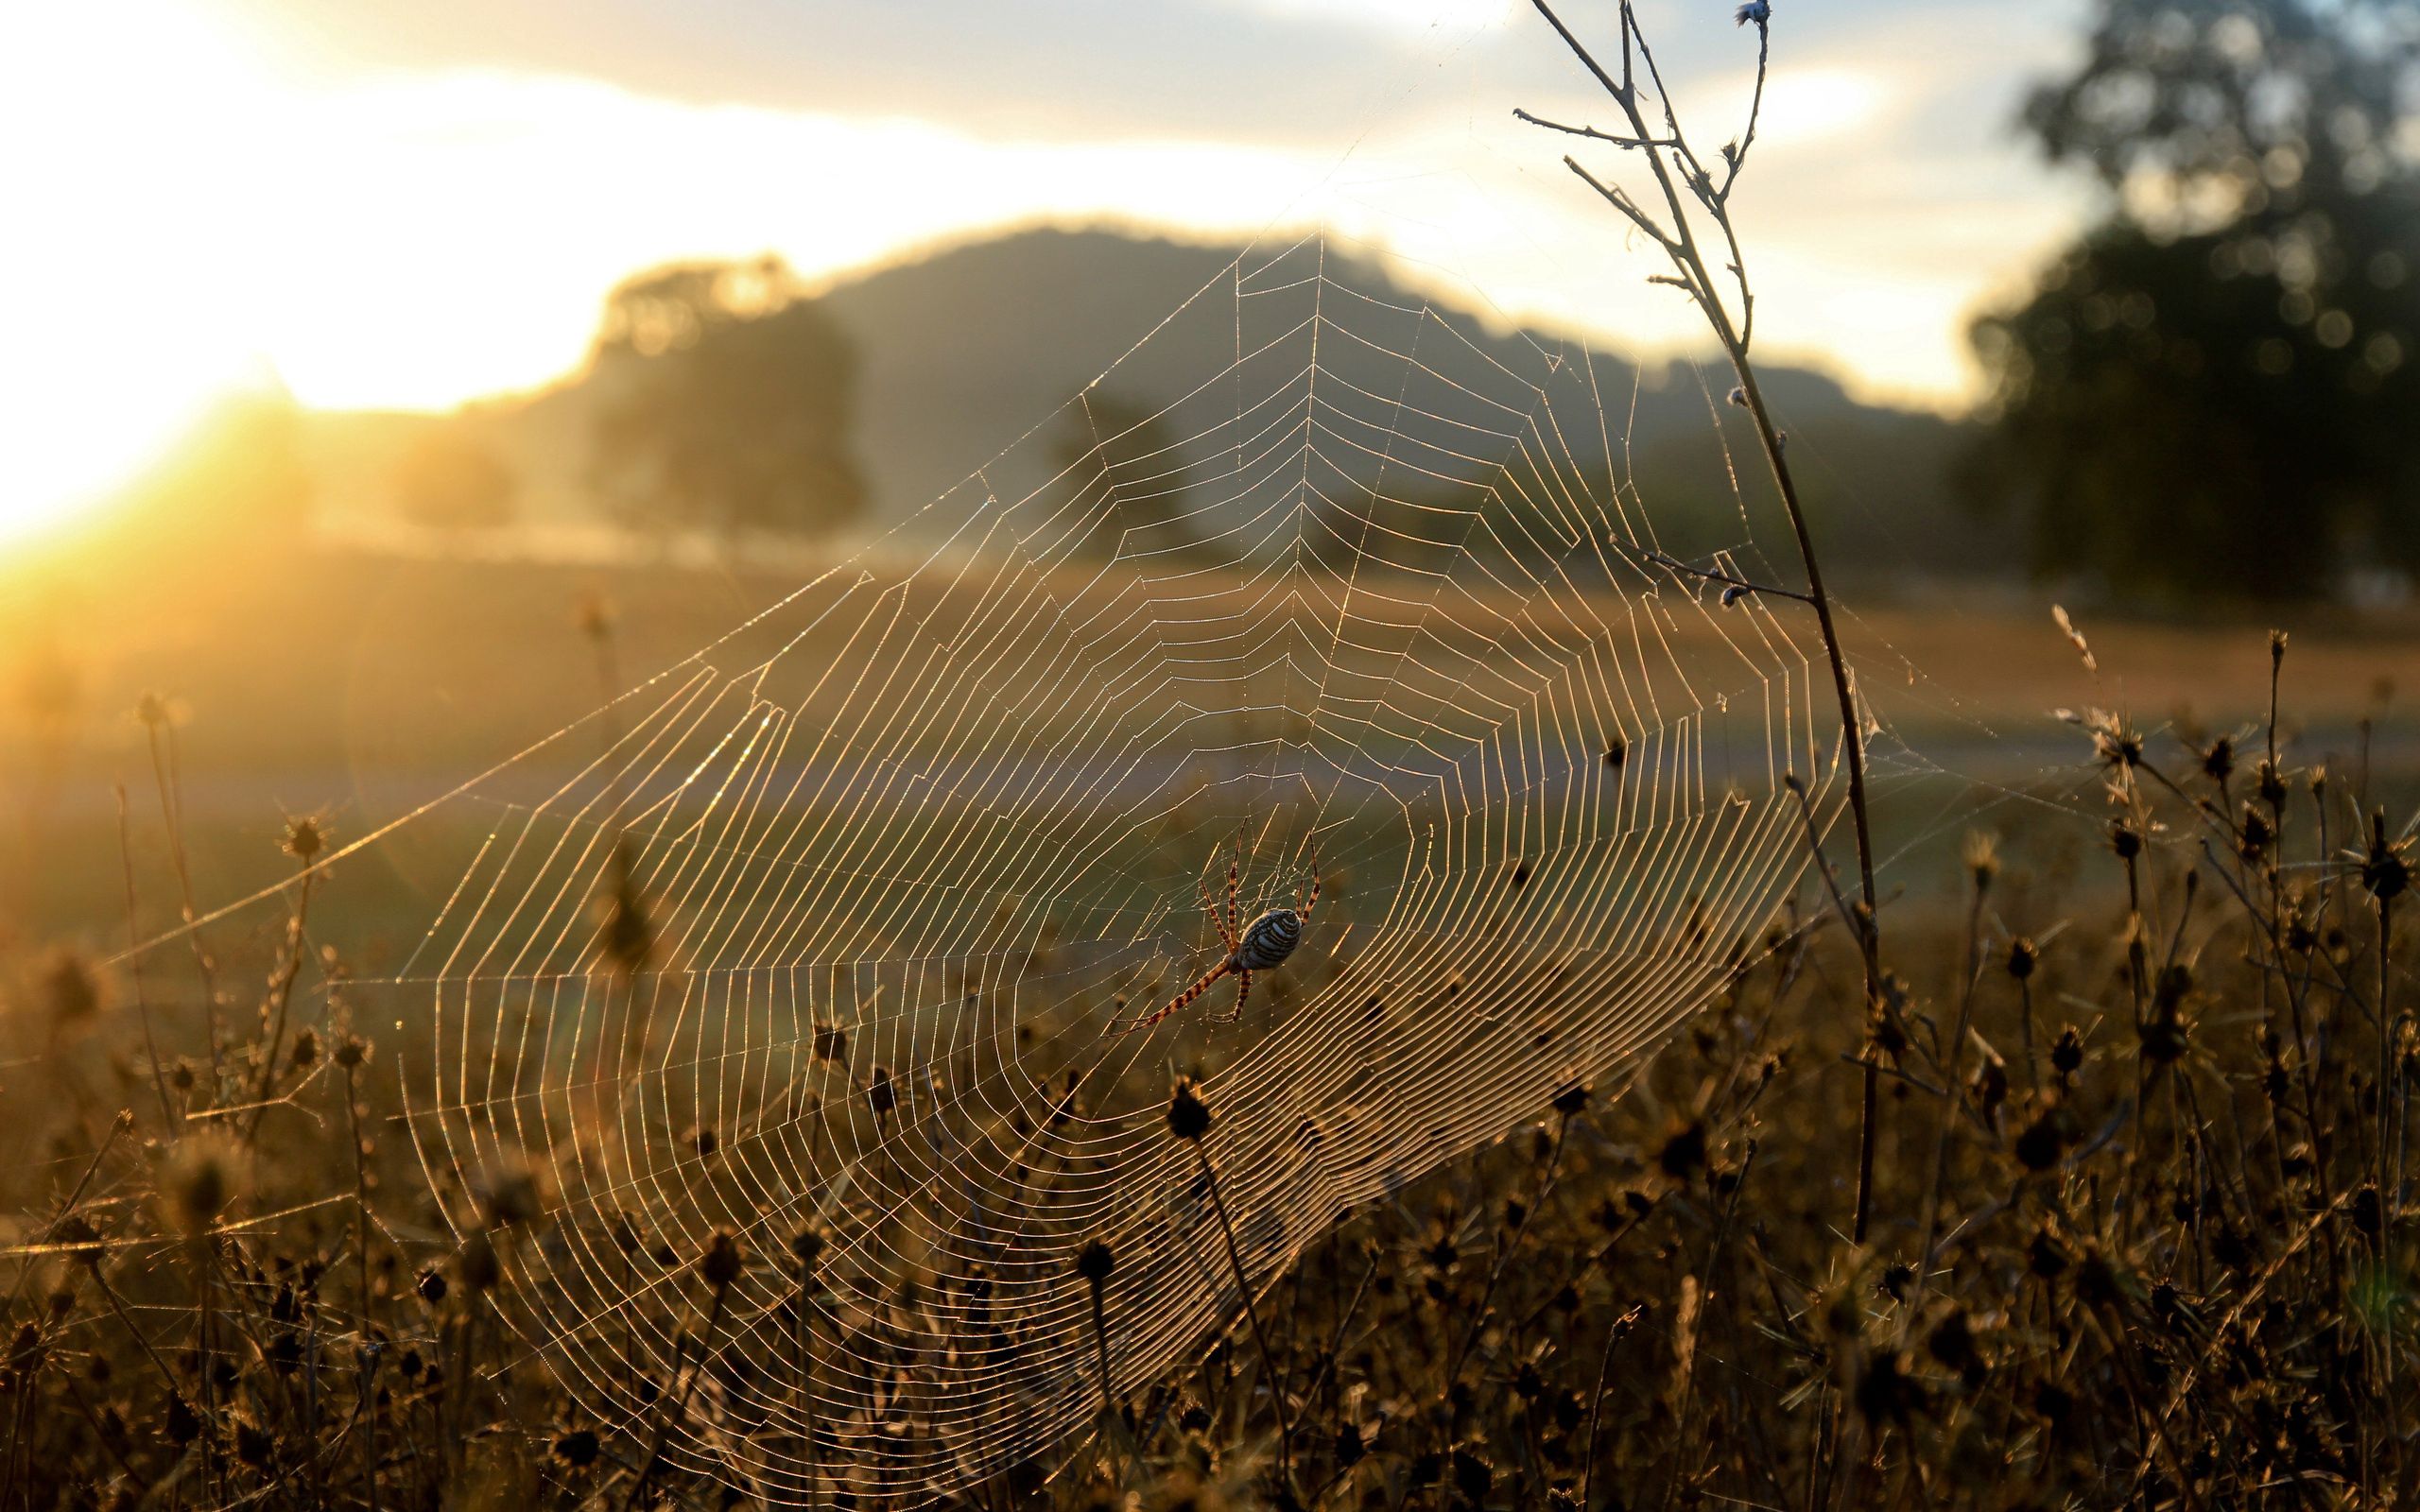 shine, dry, withered, nature, grass, sun, web, light, it's a sly, spider